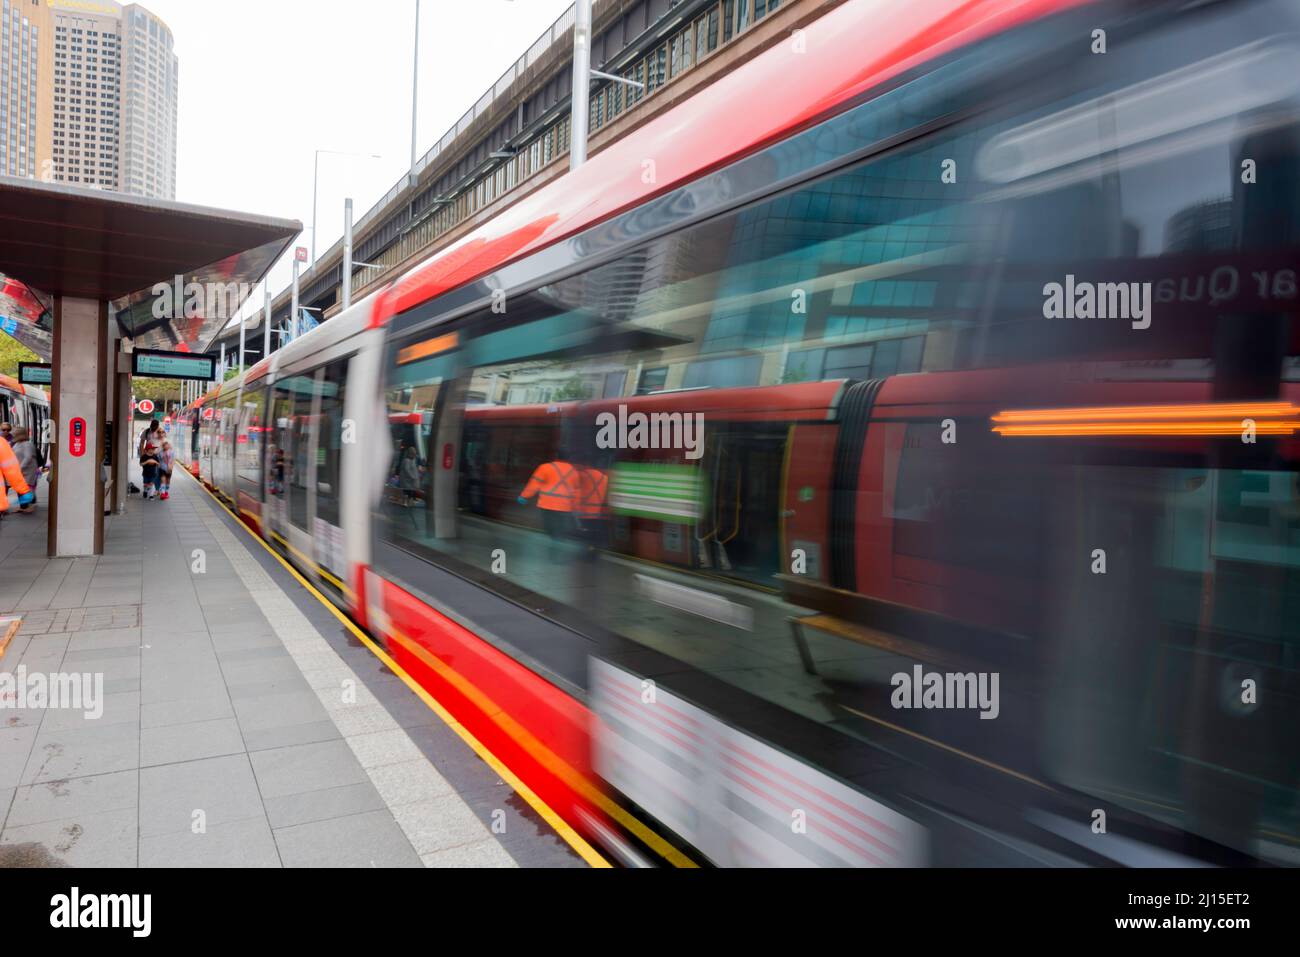 A blurred image of a Sydney Light Rail tram as it moves away from the platform at Circular Quay in central Sydney, New South Wales, Australia Stock Photo